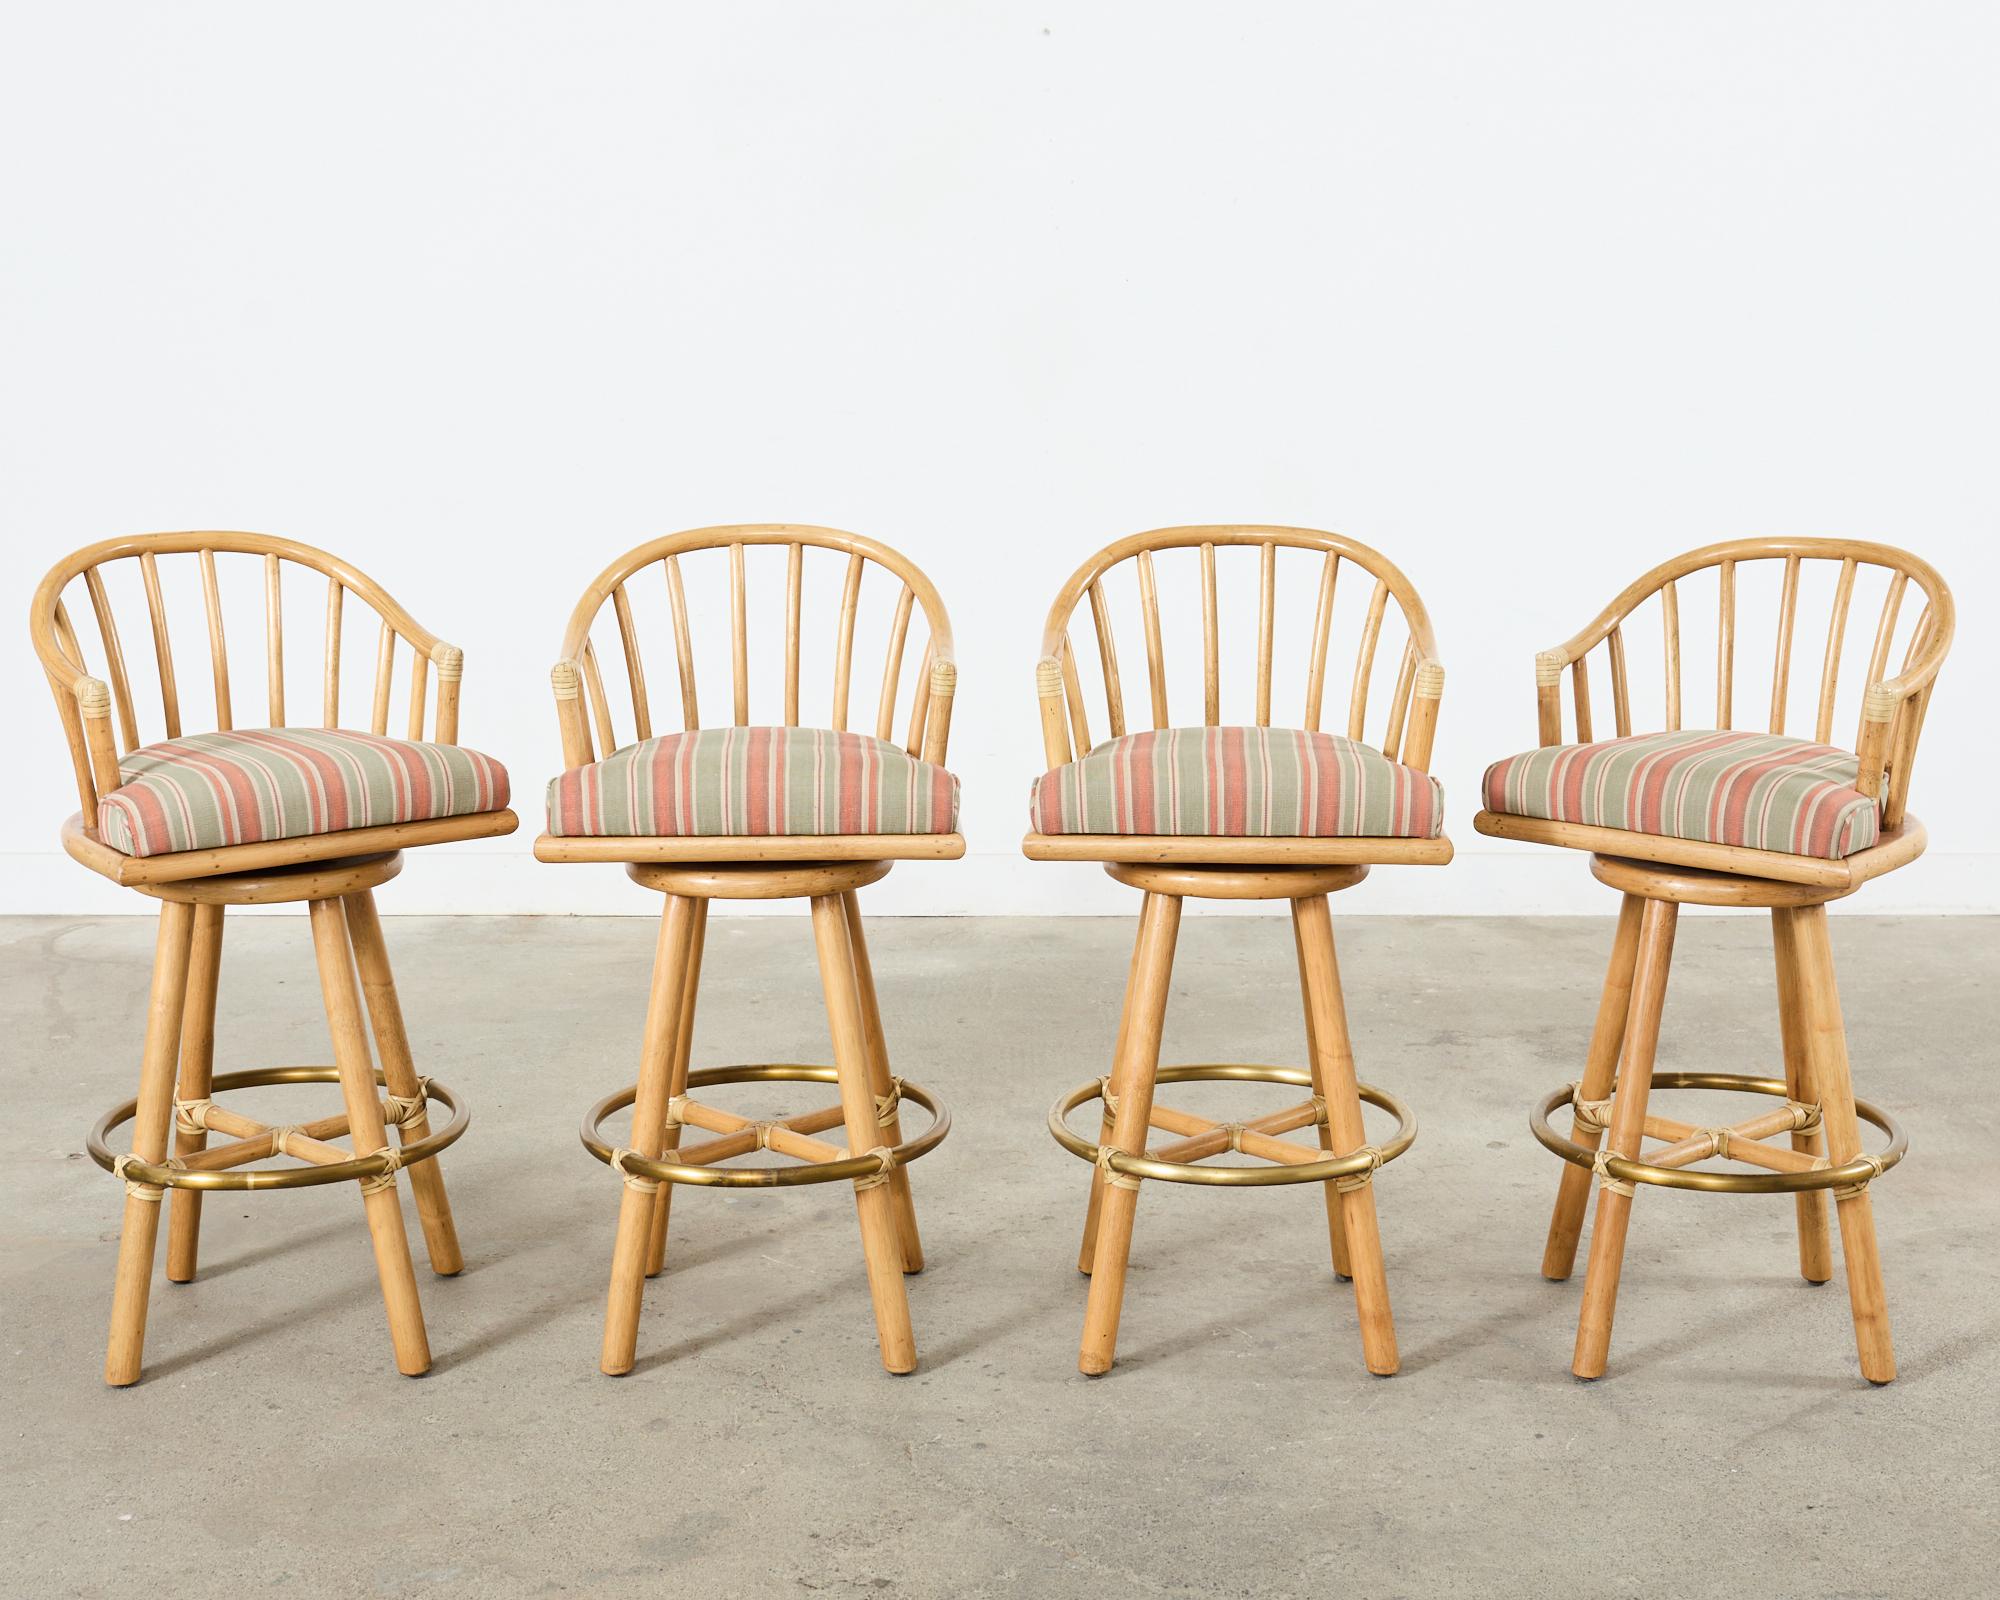 Gorgeous late 20th century set of four matching rattan and oak barstools made in the California organic modern coastal style by McGuire. The barstools feature a rattan swivel seat with a gracefully curved spindle back. The seat is upholstered with a